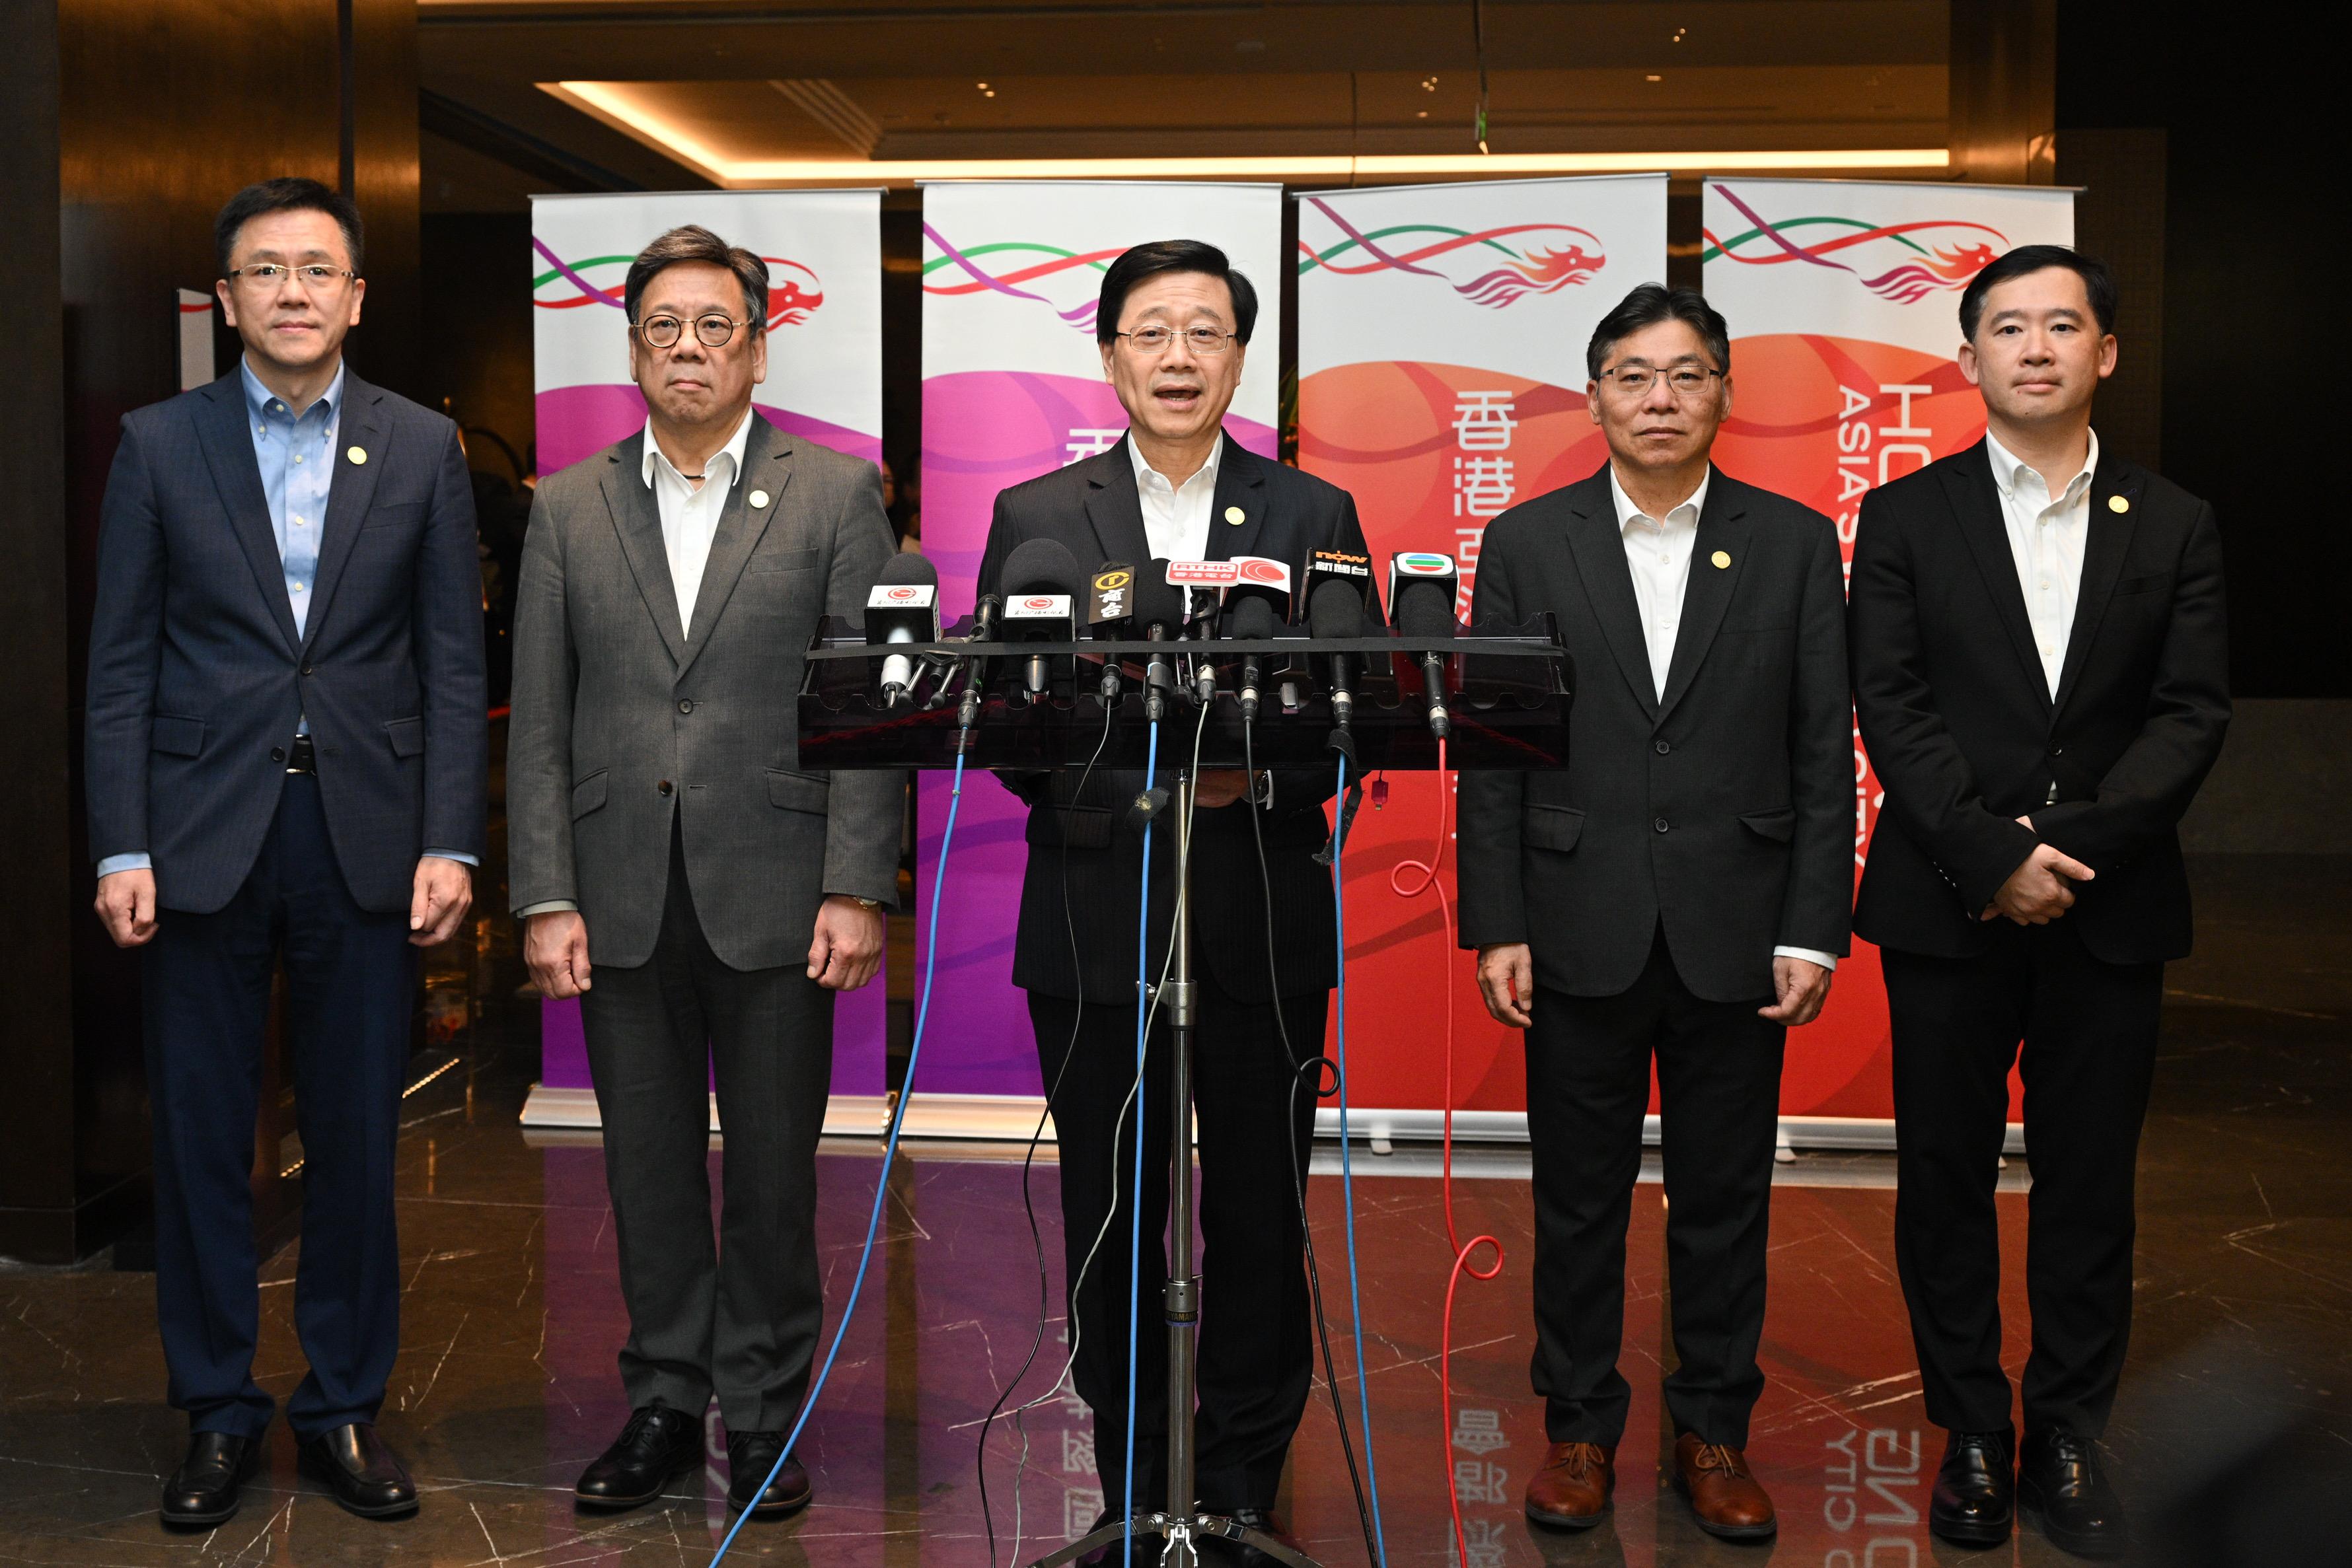 The Chief Executive, Mr John Lee (centre), together with the Secretary for Commerce and Economic Development, Mr Algernon Yau (second left); the Secretary for Transport and Logistics, Mr Lam Sai-hung (second right); the Secretary for Innovation, Technology and Industry, Professor Sun Dong (first left); and the Under Secretary for Constitutional and Mainland Affairs, Mr Clement Woo (first right), meets the media in Guiyang today (July 7).